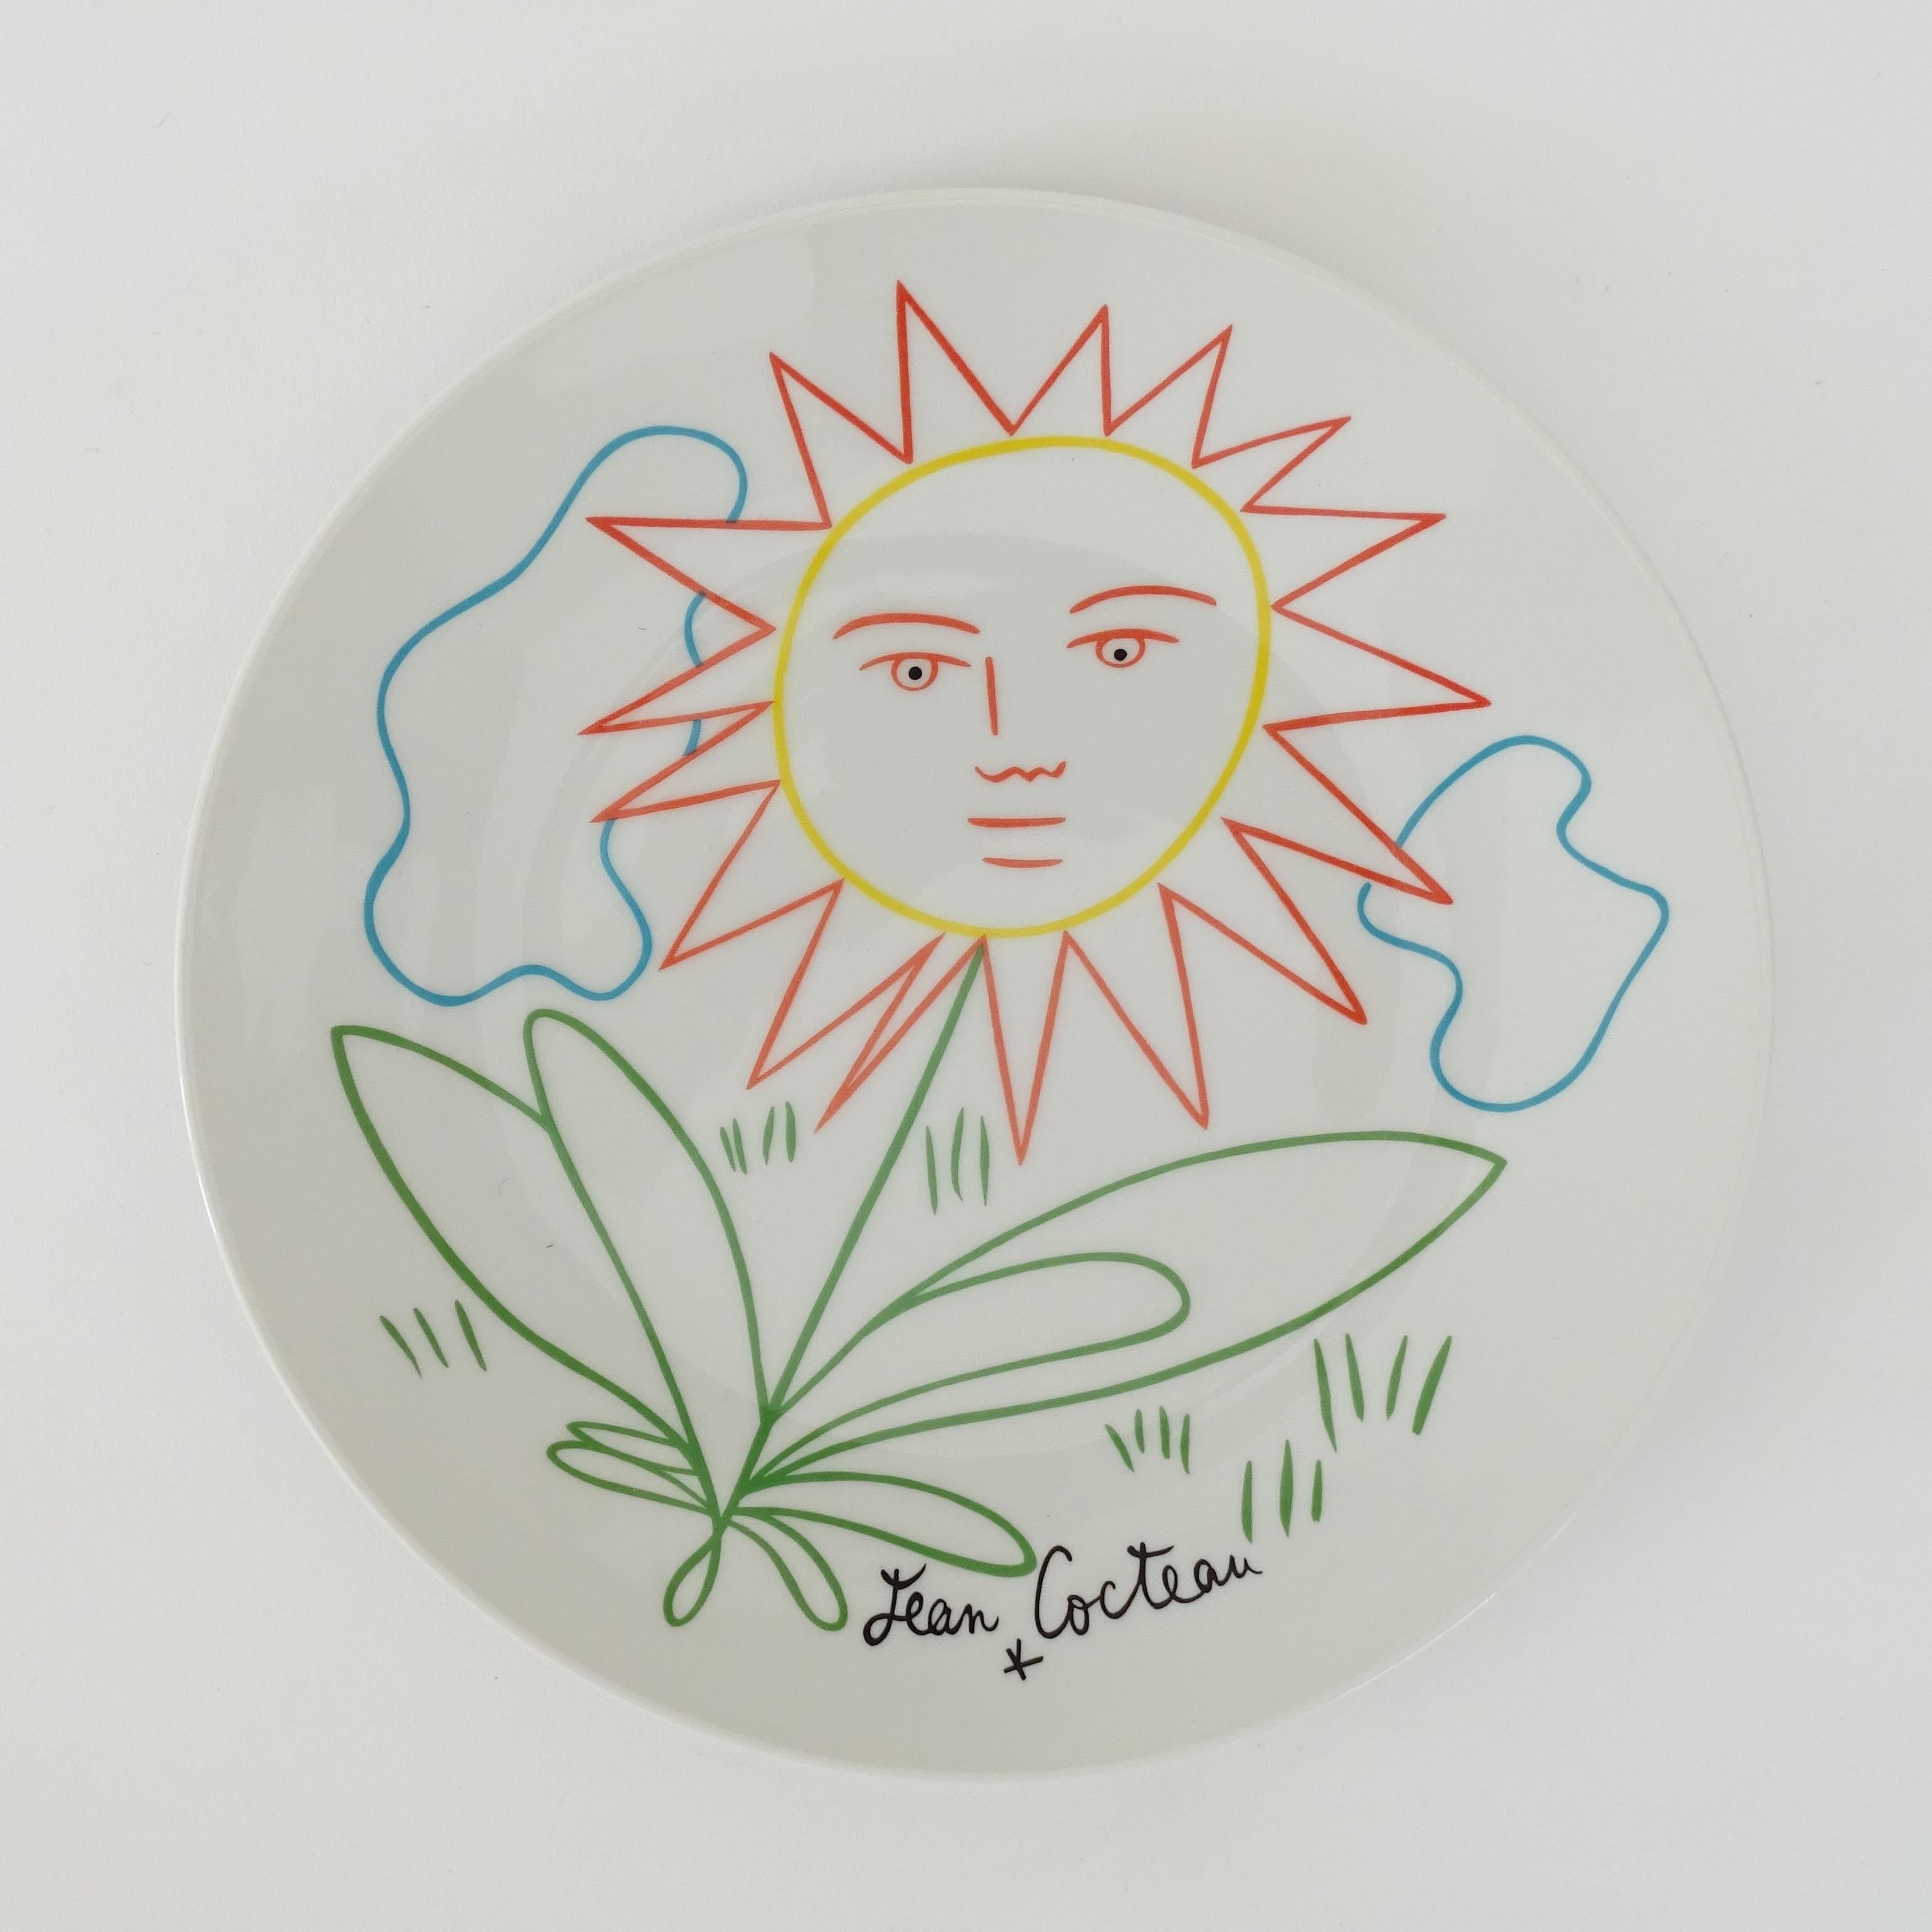 Jean Cocteau flower wall plate for Fenwick, France 1960s
In Its original box.